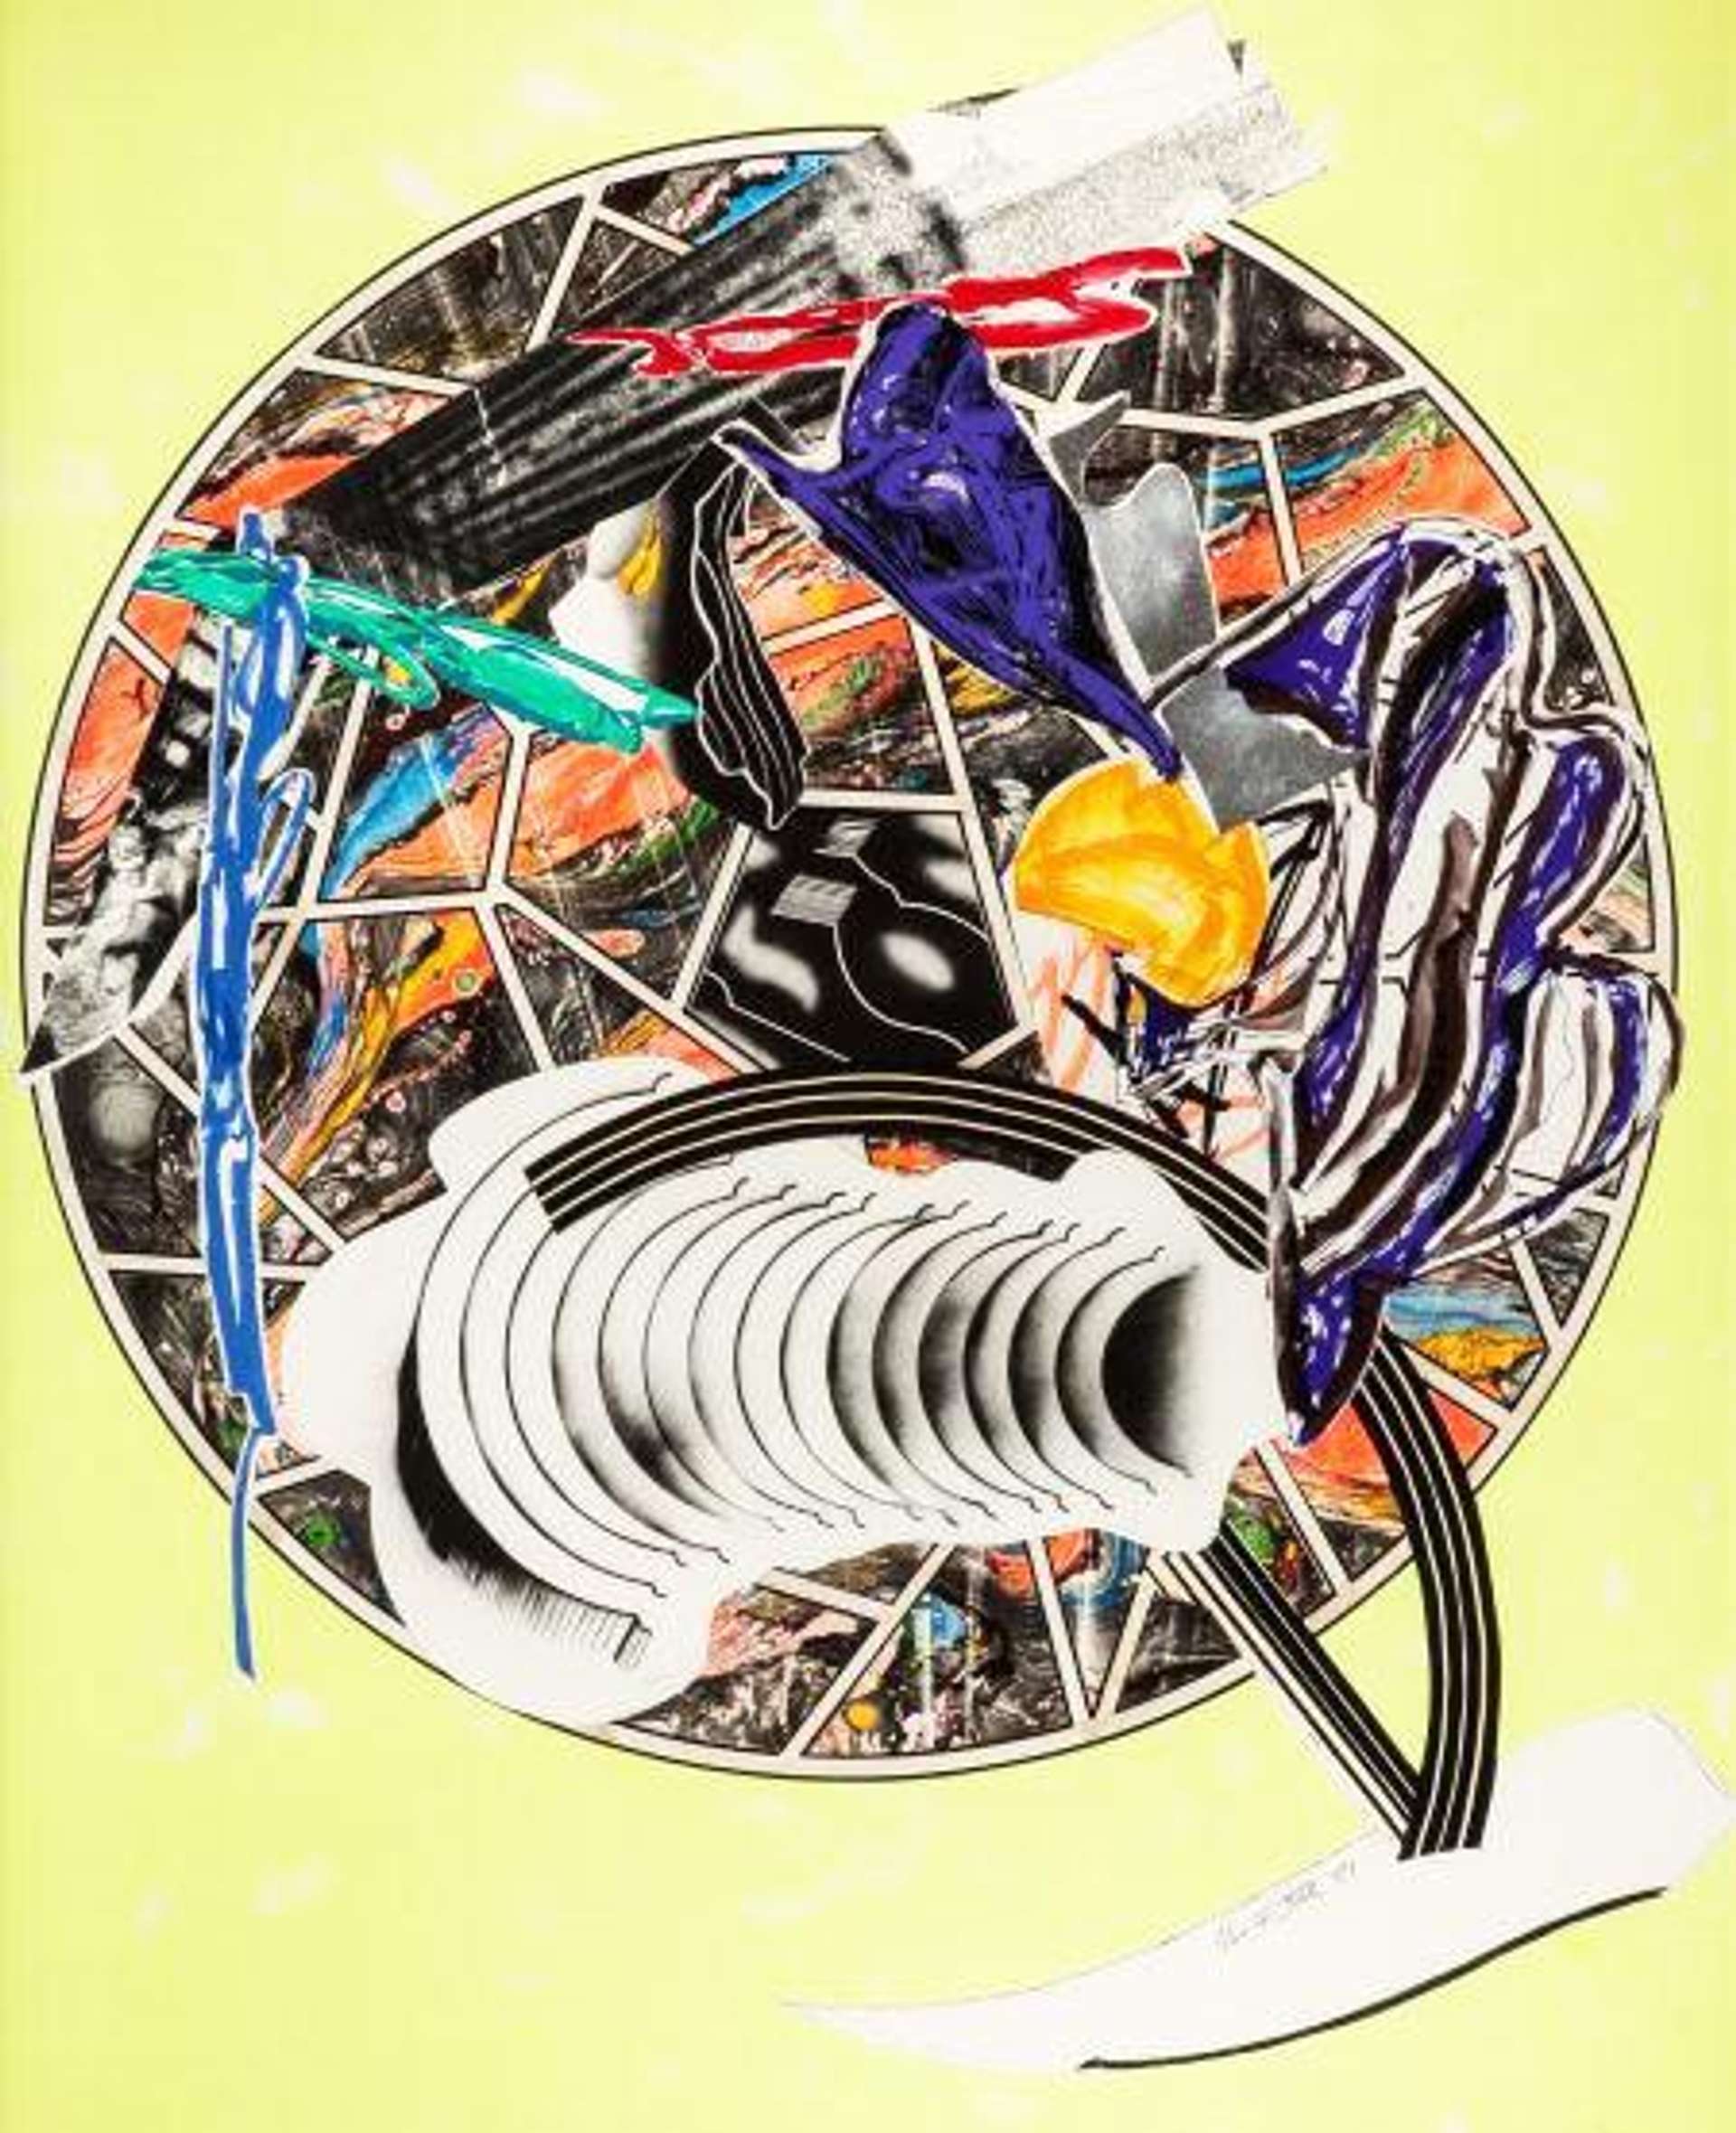 The Whale As A Dish - Signed Print by Frank Stella 1989 - MyArtBroker